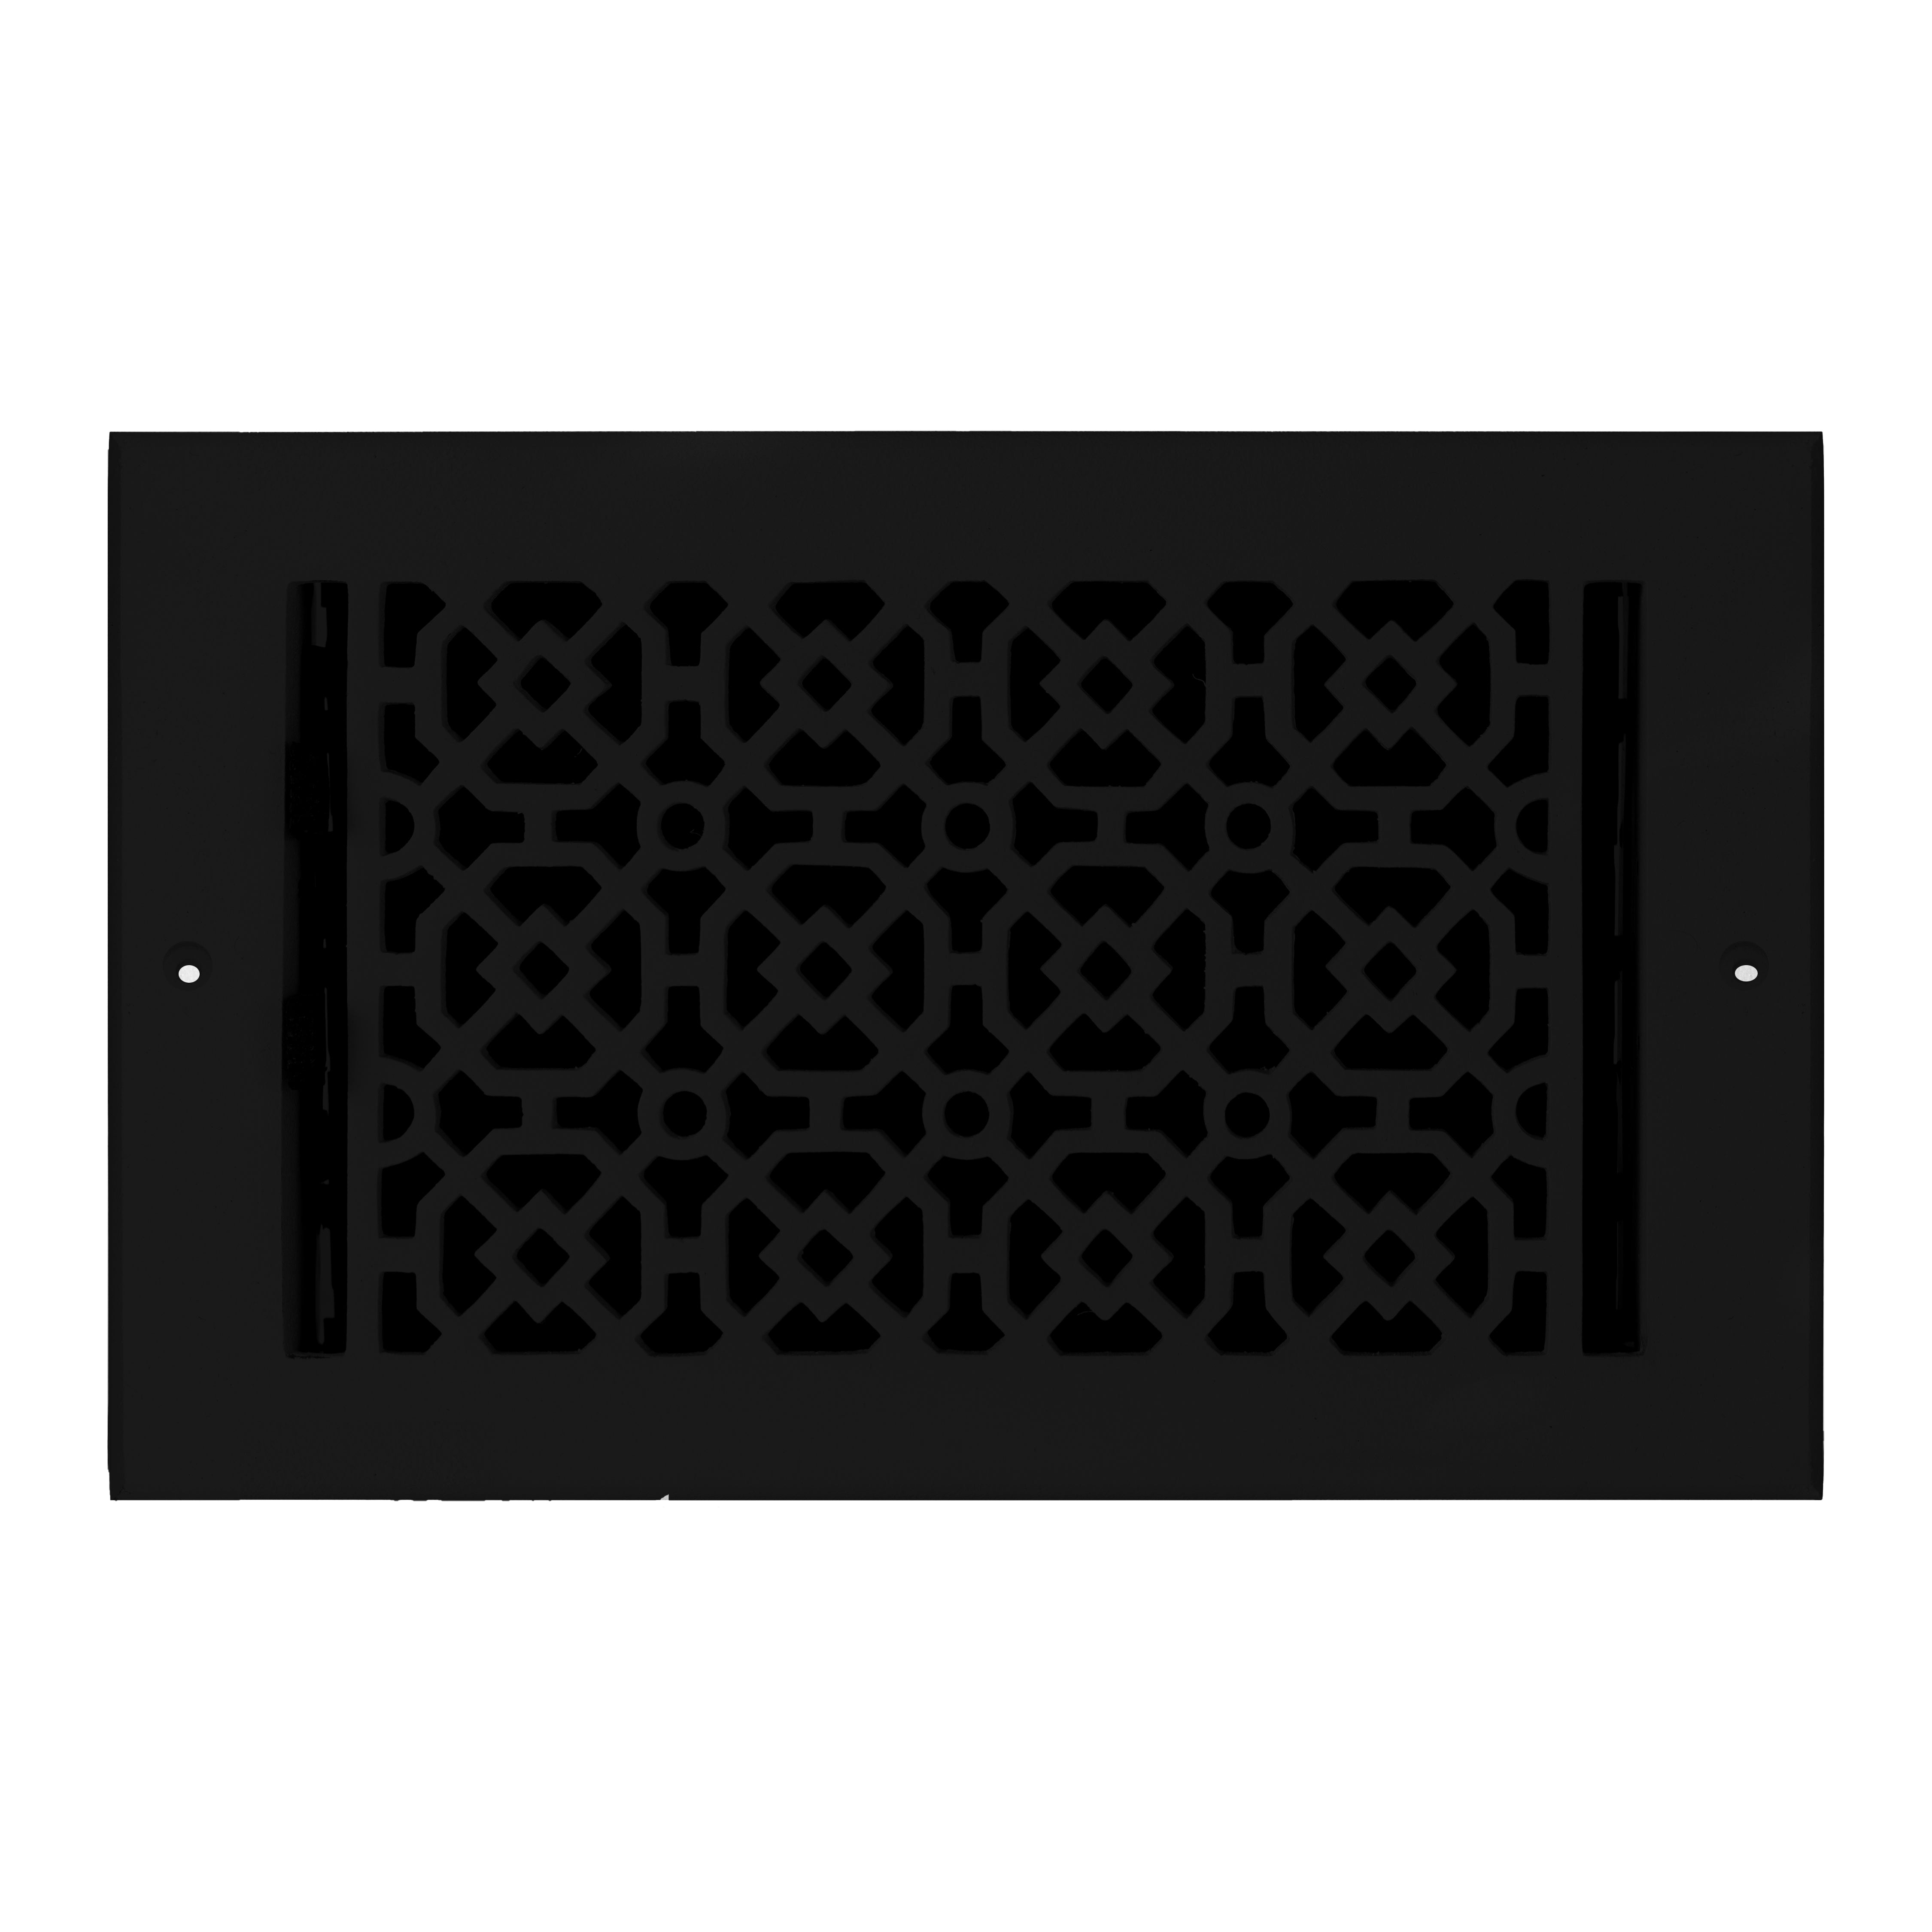 Achtek Air Supply Vent 6"x 10" Duct Opening (Overall 7-1/2"x 11-3/4") Solid Cast Aluminium Register Cover | Powder Coated